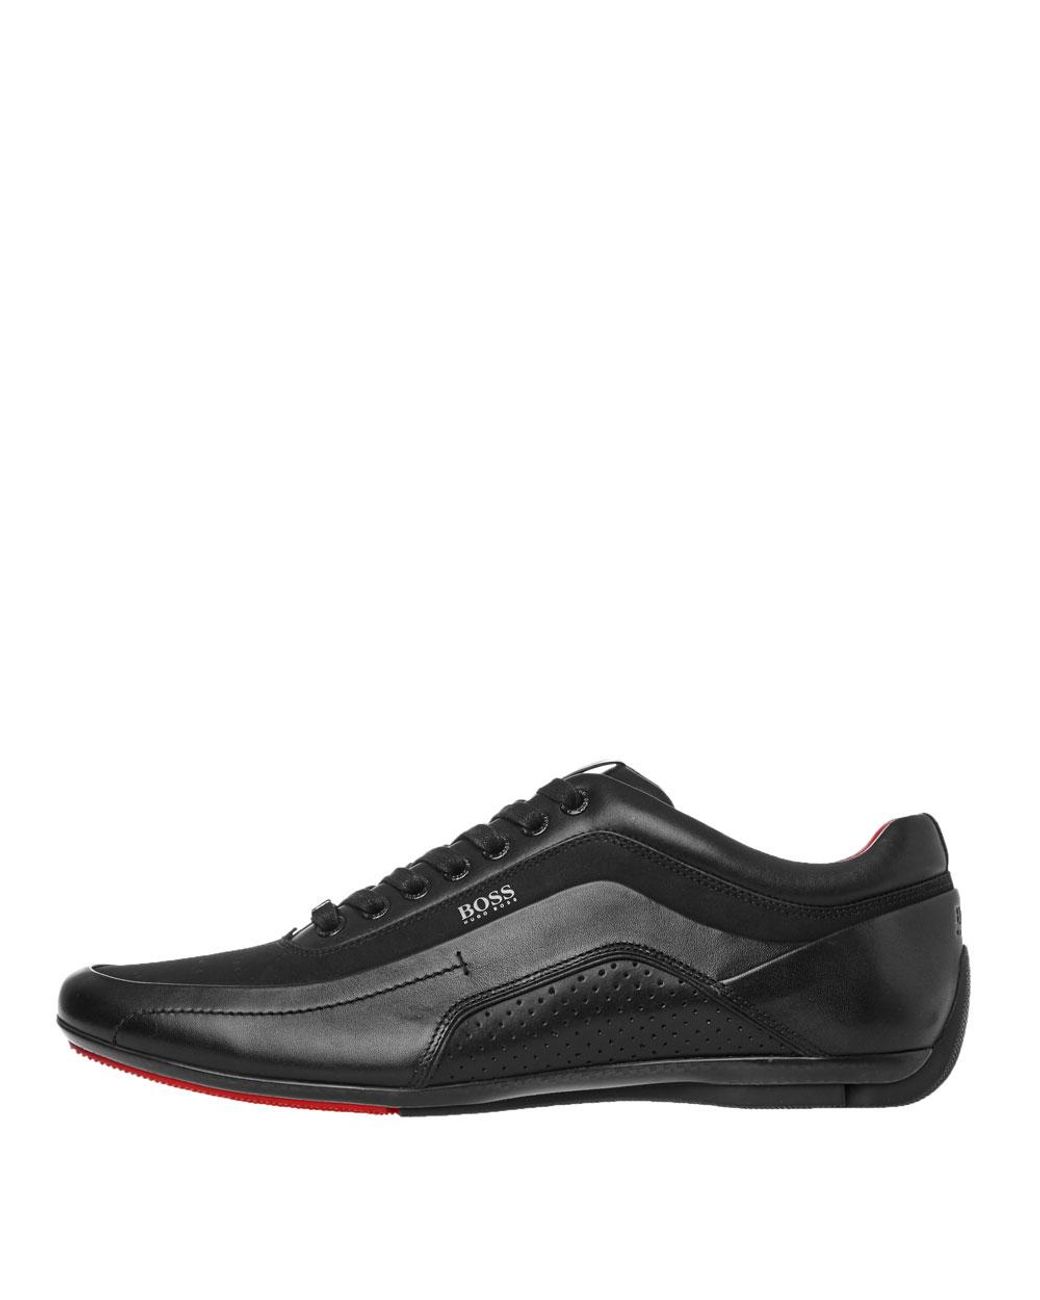 BOSS by HUGO BOSS Leather Hb Racing Trainers in Black for Men | Lyst UK